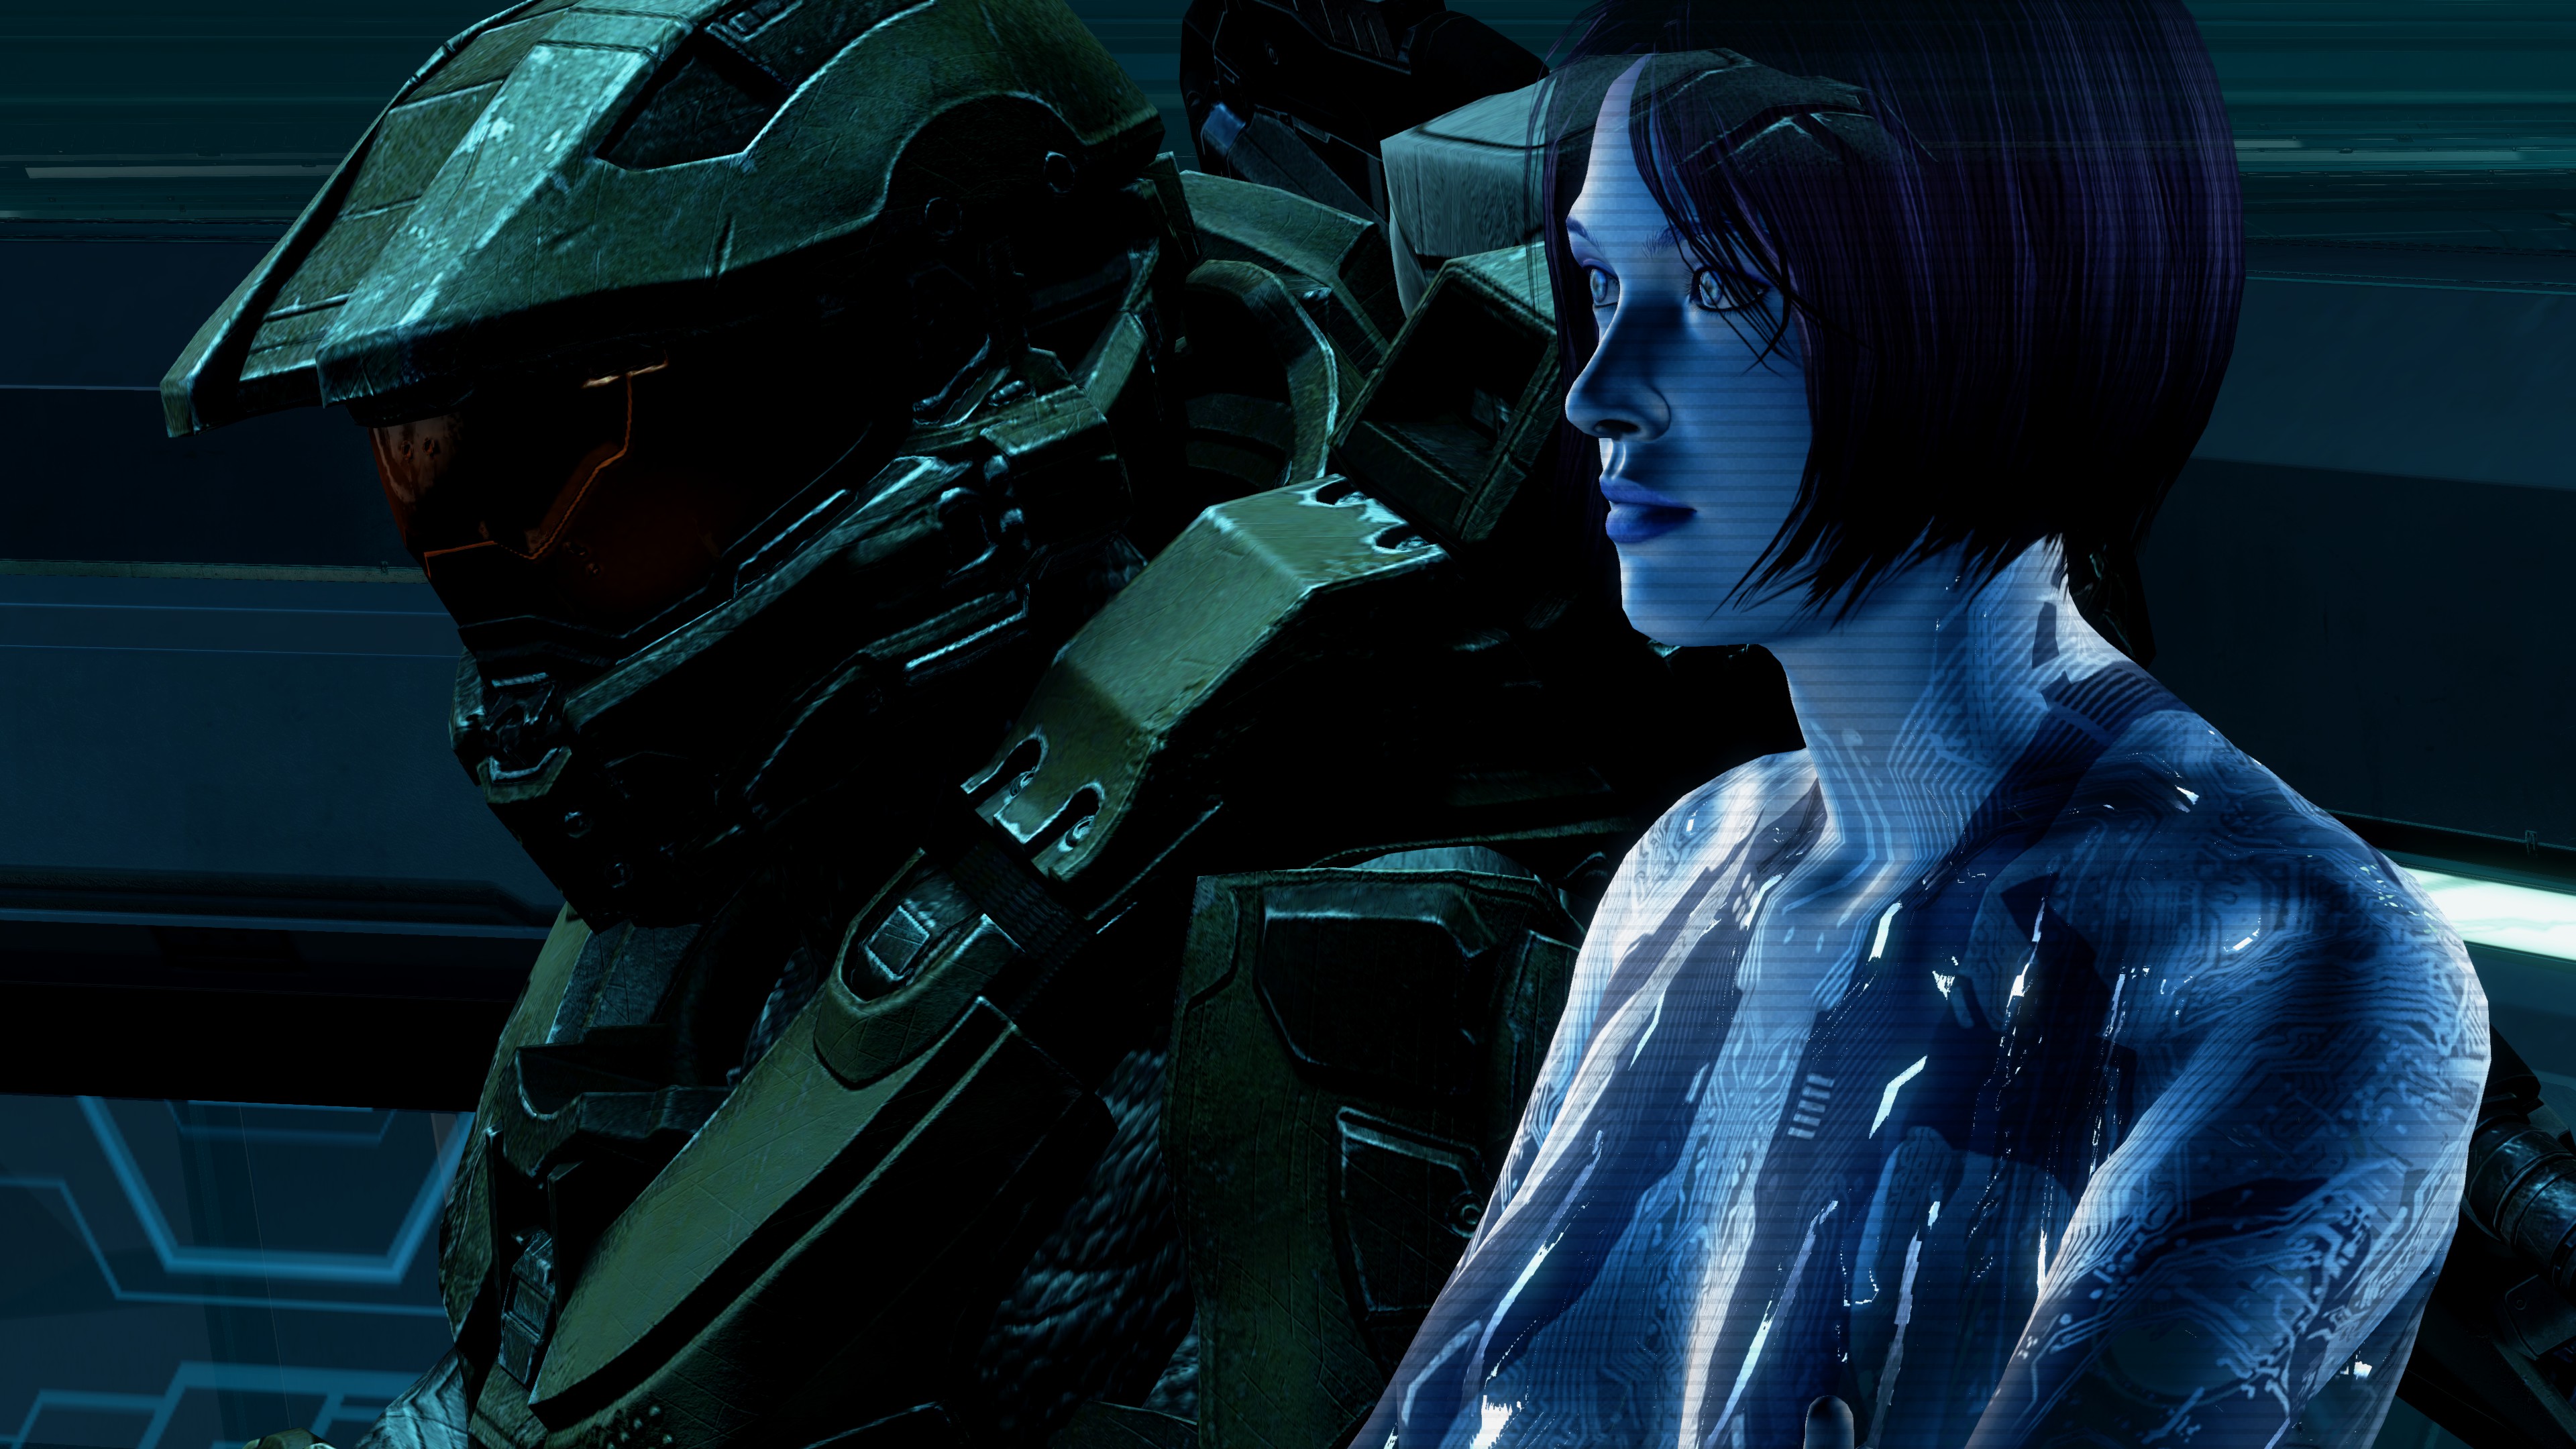 Halo 4: We We Know From The E3 2011 Trailer